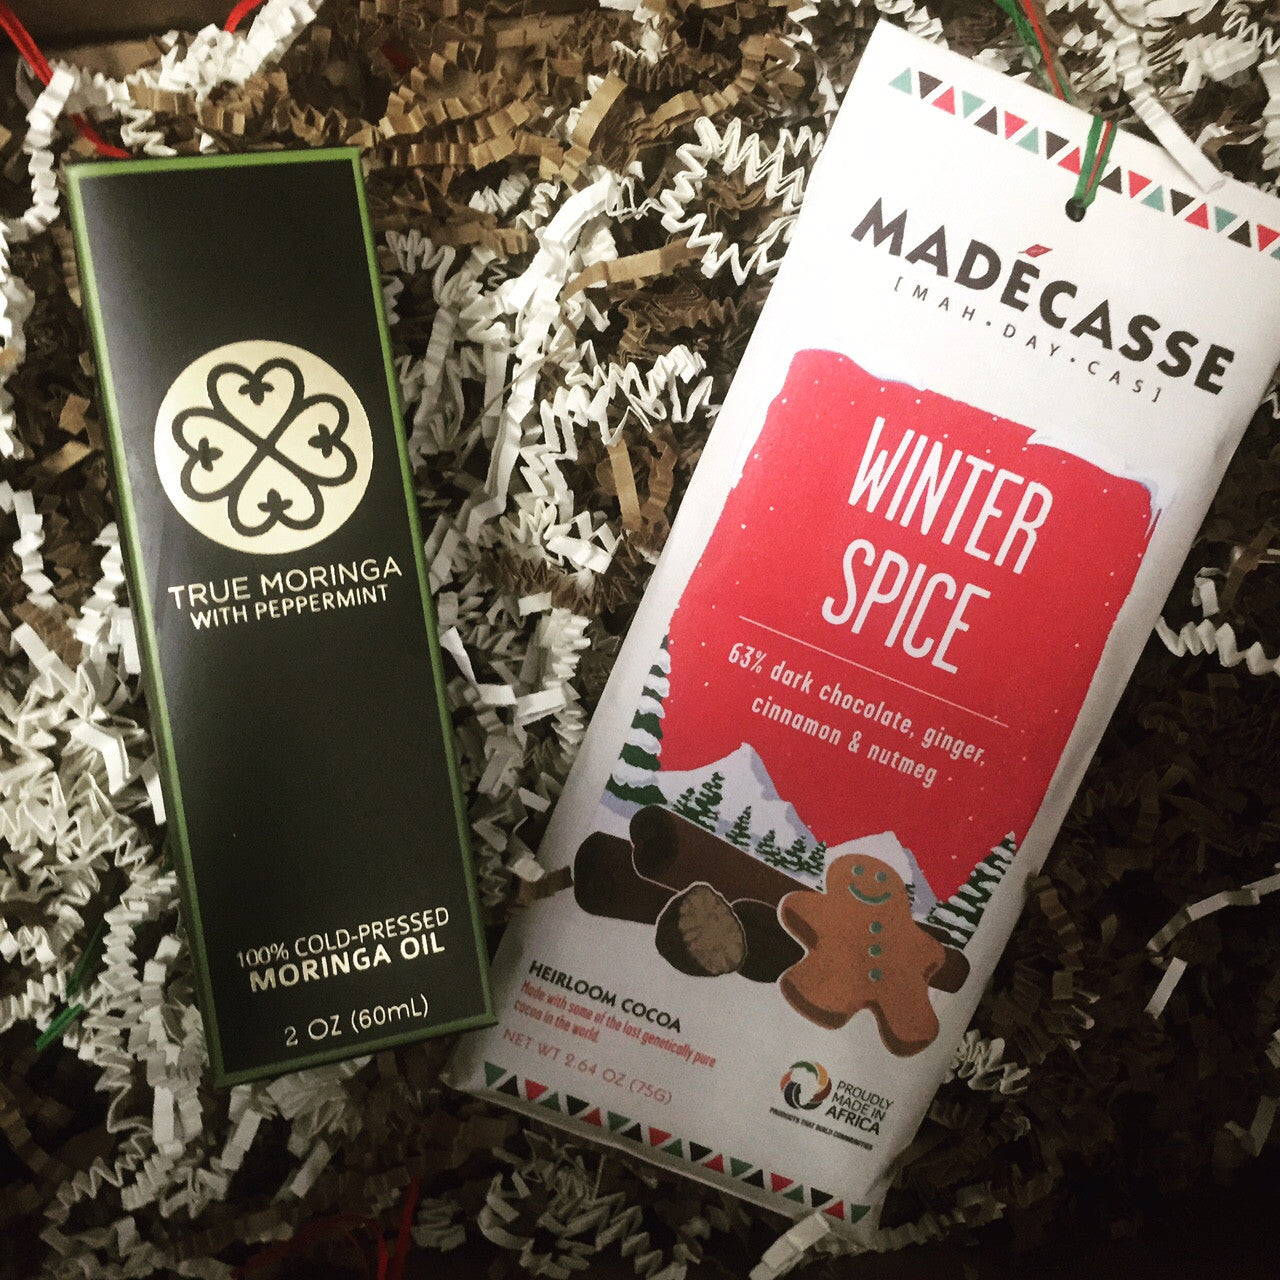 WORLD-CHANGING CHOCOLATE: A CONVERSATION WITH THE FOUNDER OF MADECASSE